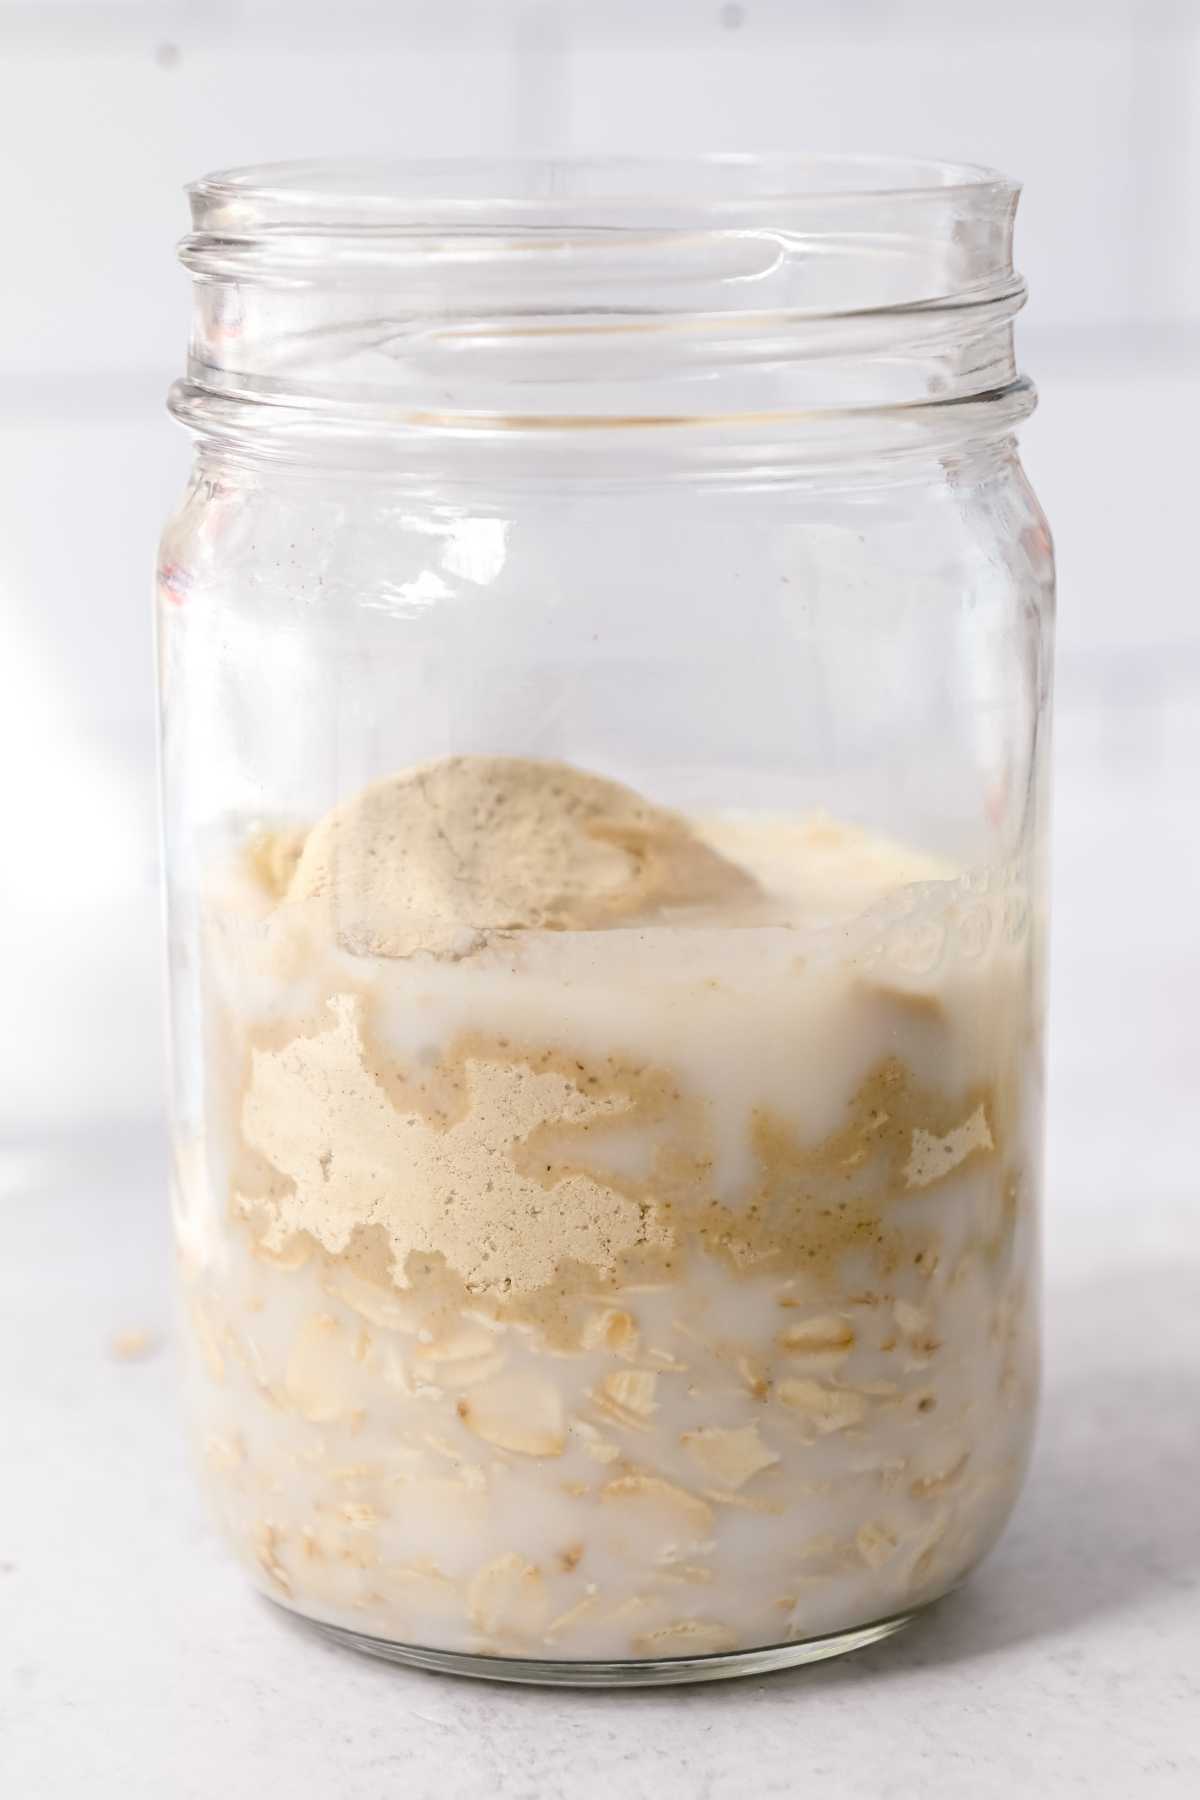 oatmeal, protein powder, and almond milk in a glass jar.